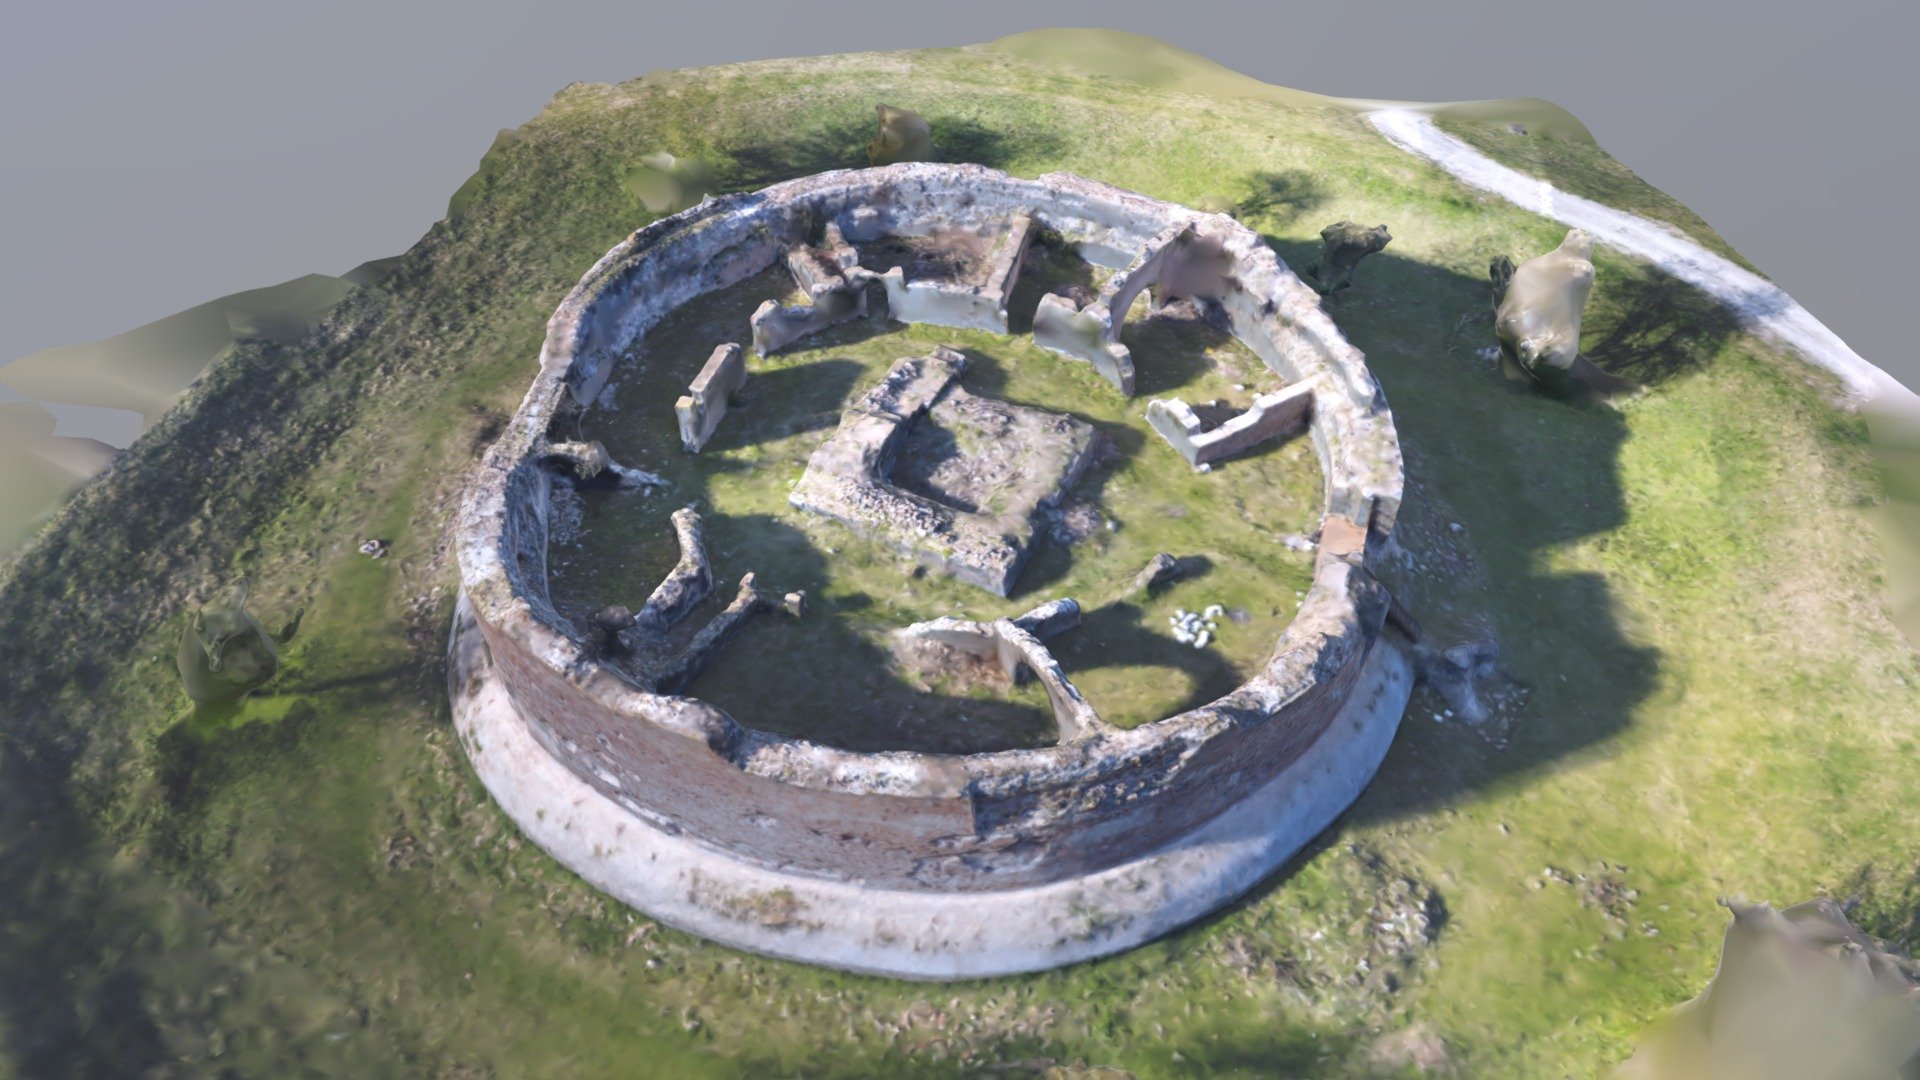 3D model of Kolođvar Fort, Croatia. 
Recorded on 15. 3. 2020. 
Kolođvar is a medieval fort located in eastern Croatia, in the surrounding area of Osijek, about 4km to the south of Čepin. It is first mentioned sometime during the 13th century, when it served as a Korogy family estate. It was demolished and then abandoned in the first half of the 16th century by the Ottoman conquest of Hungary, after which the fort lost it's primary role. It was in a pretty bad shape until the 20th century, when its value was recognised and its first restoration happened.
There are several folk legends connected to it, and in recent times, it served as a centerpoint of a local medieval festival (Return of the knights to fortress Kolođvar) 3d model